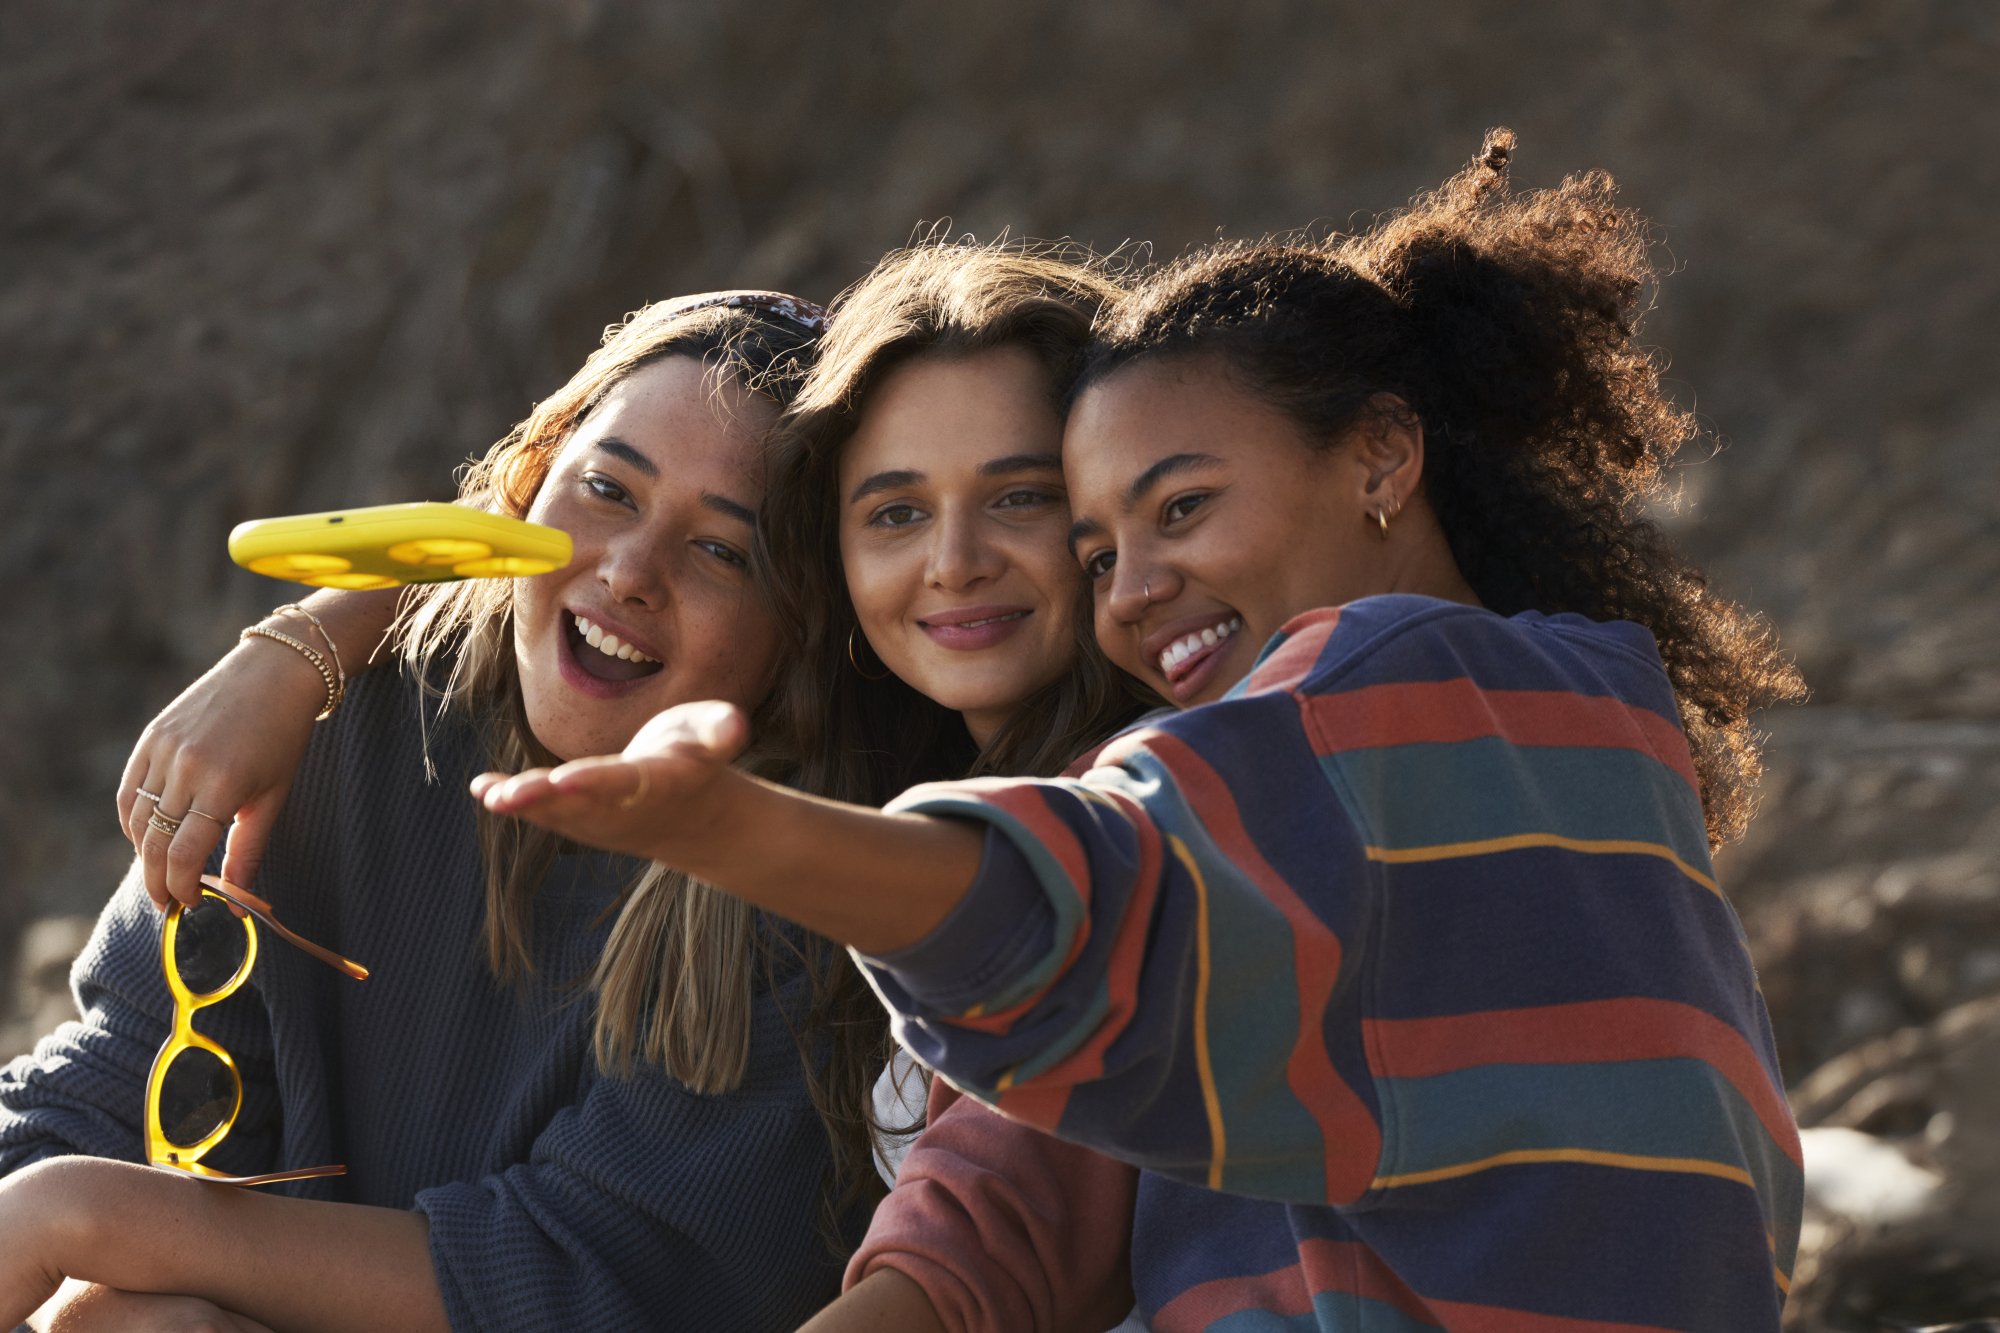 Three young women look at a yellow drone in front of them.